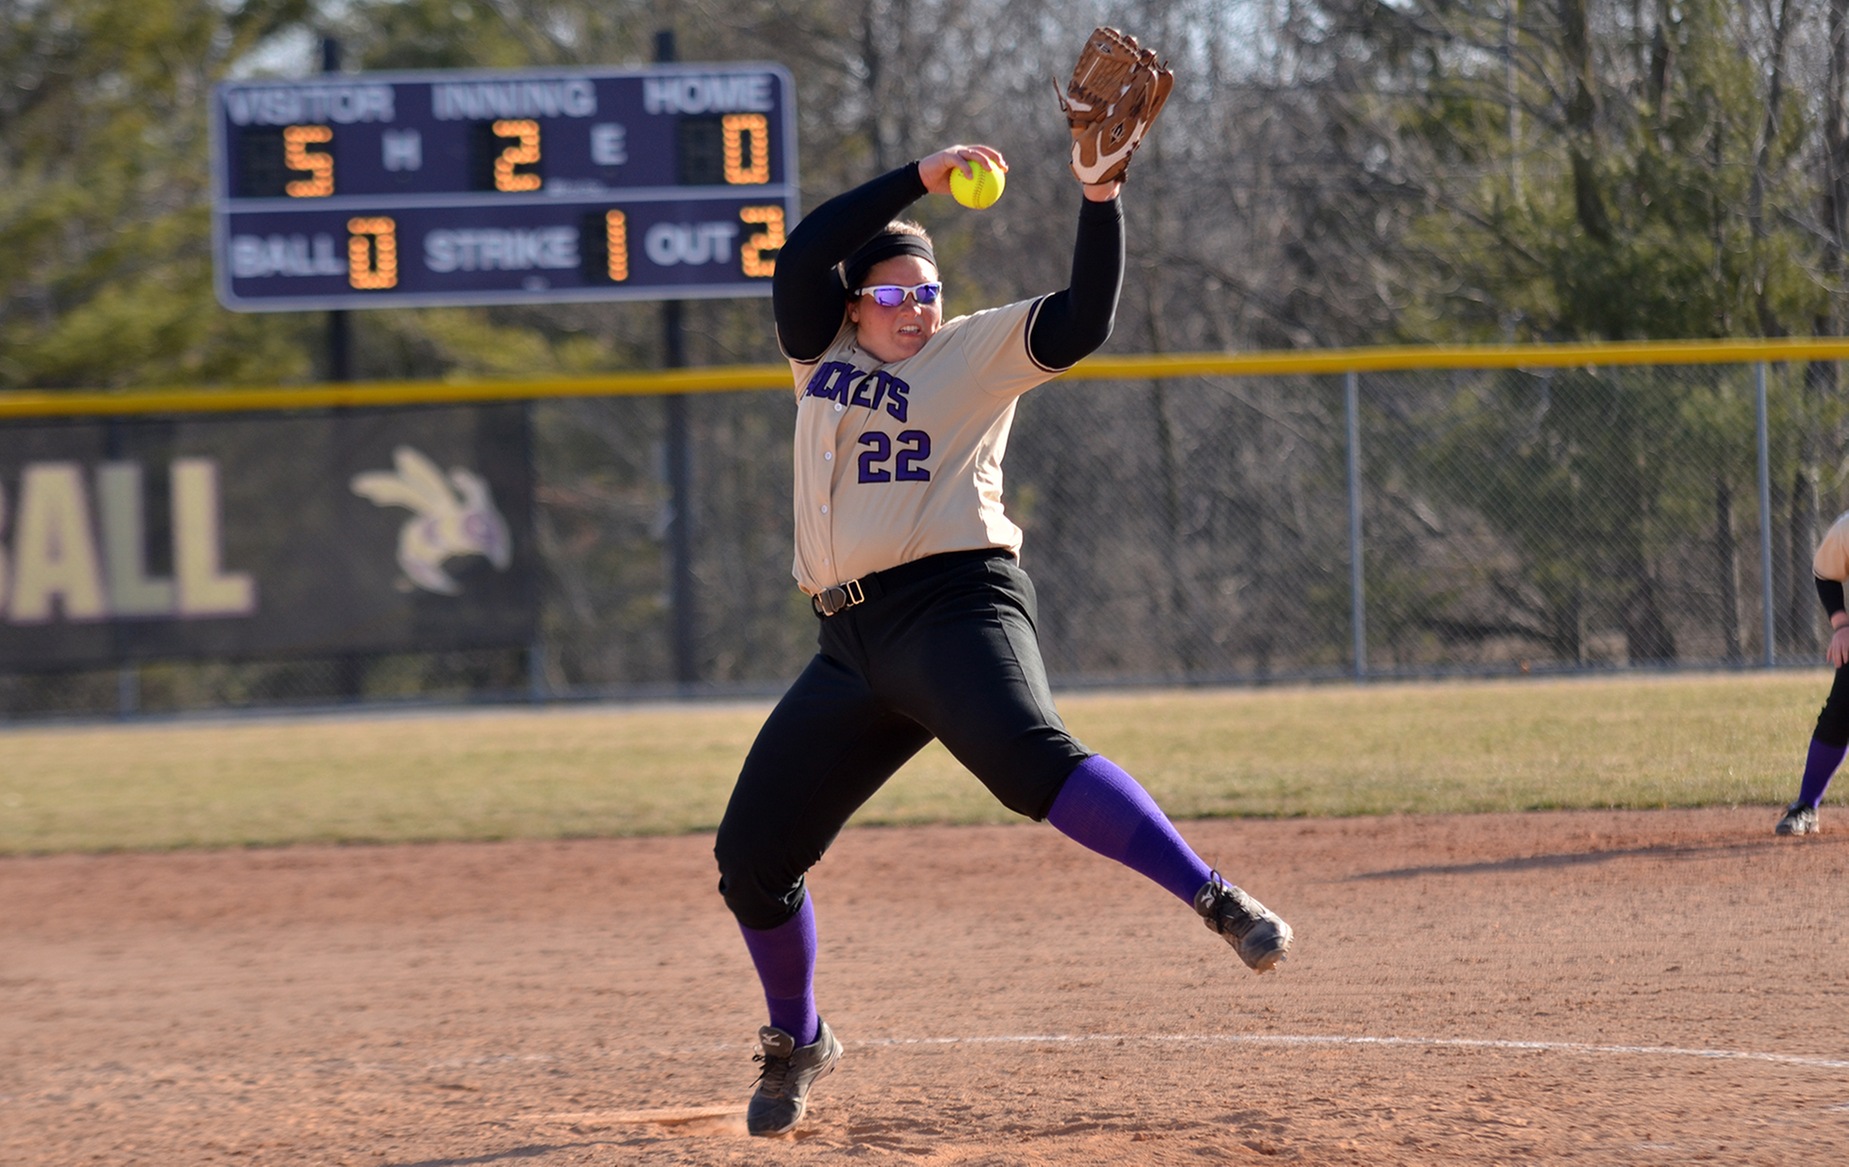 Purple and Gold Blanked by Denison in Softball Action